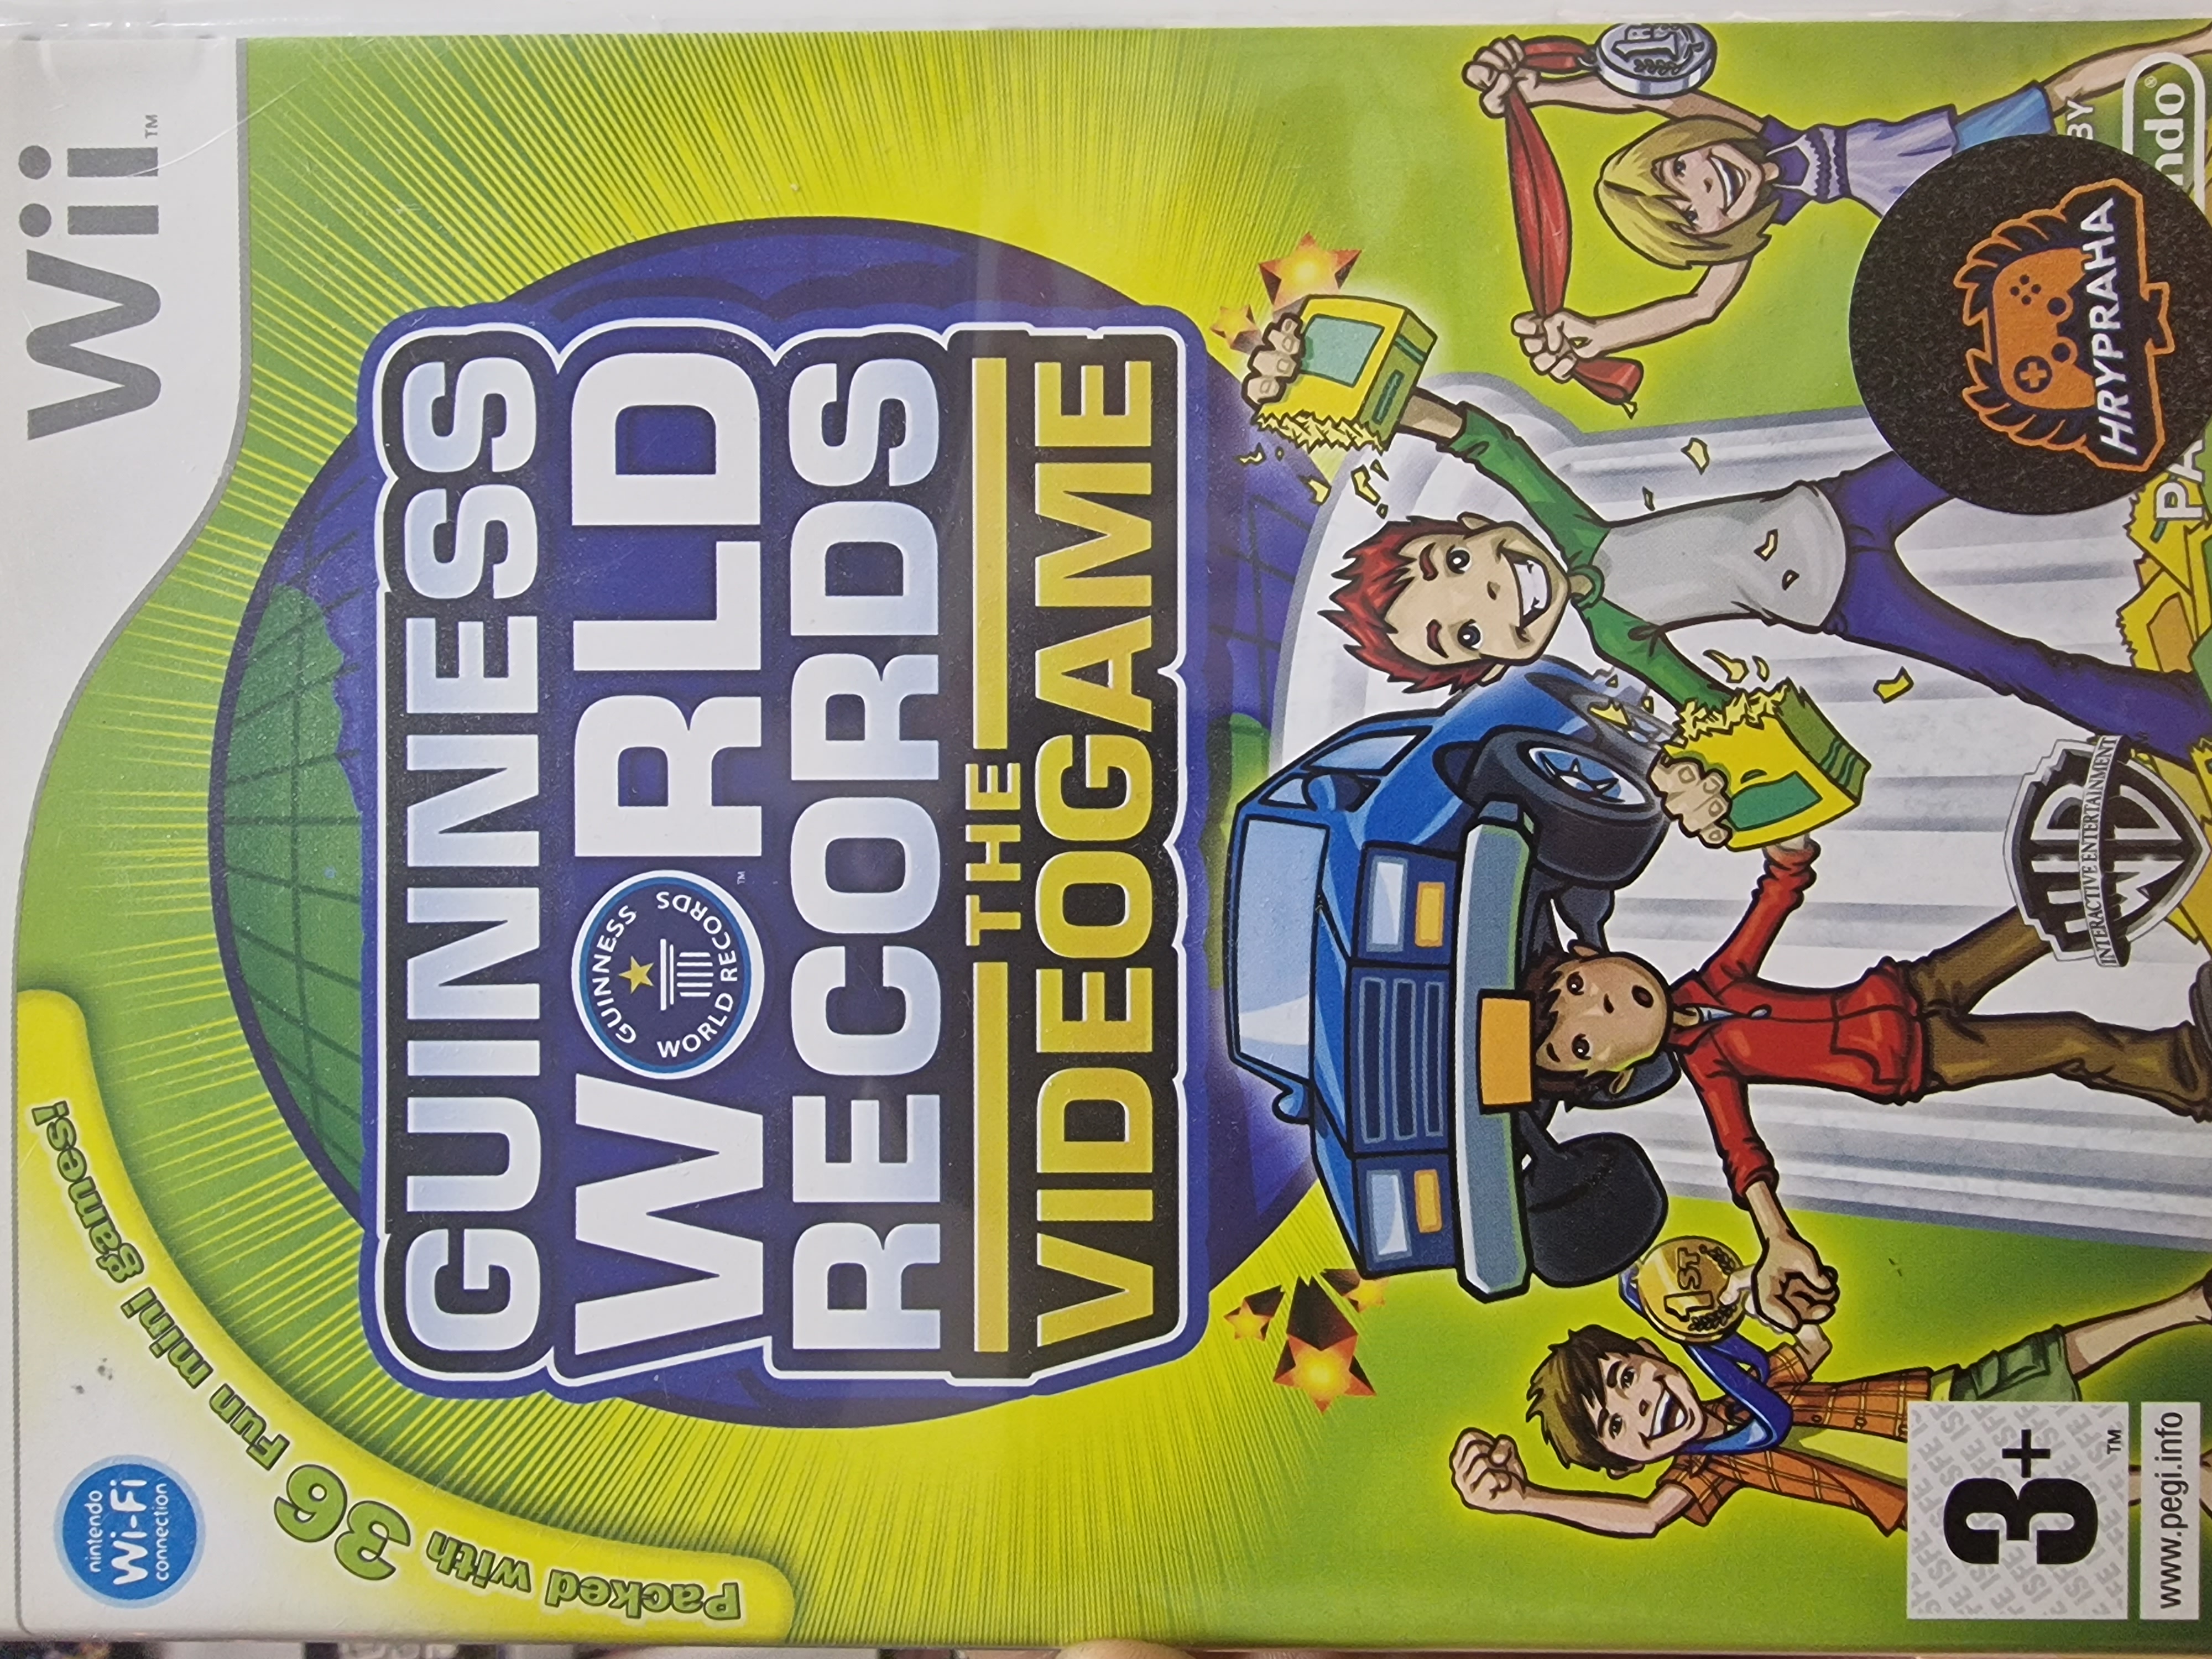 Guinness World Records The Videogame  - Nintendo wii 